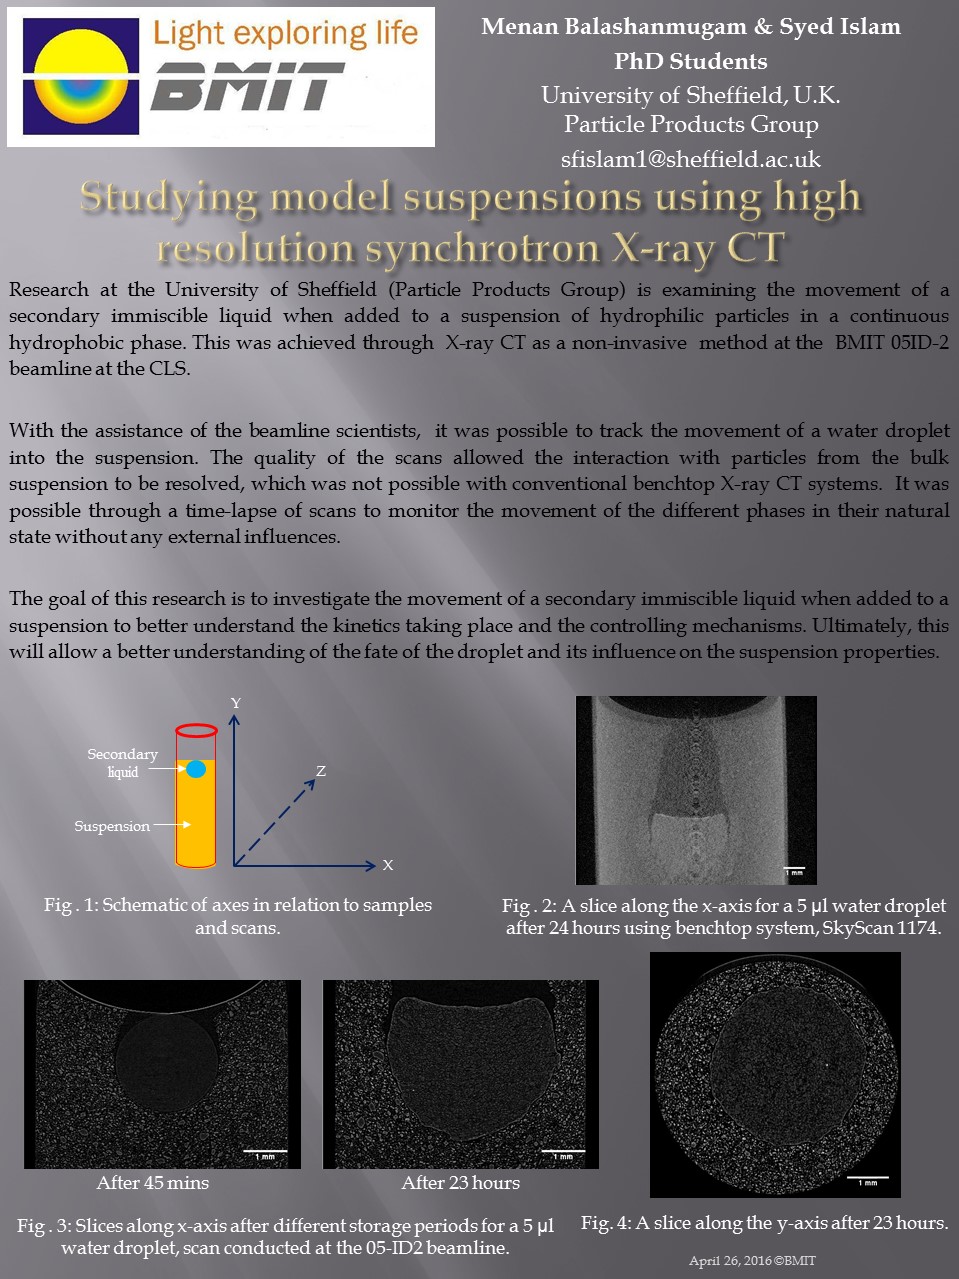 Studying model suspensions using high resolution synchrotron X-ray CT Image